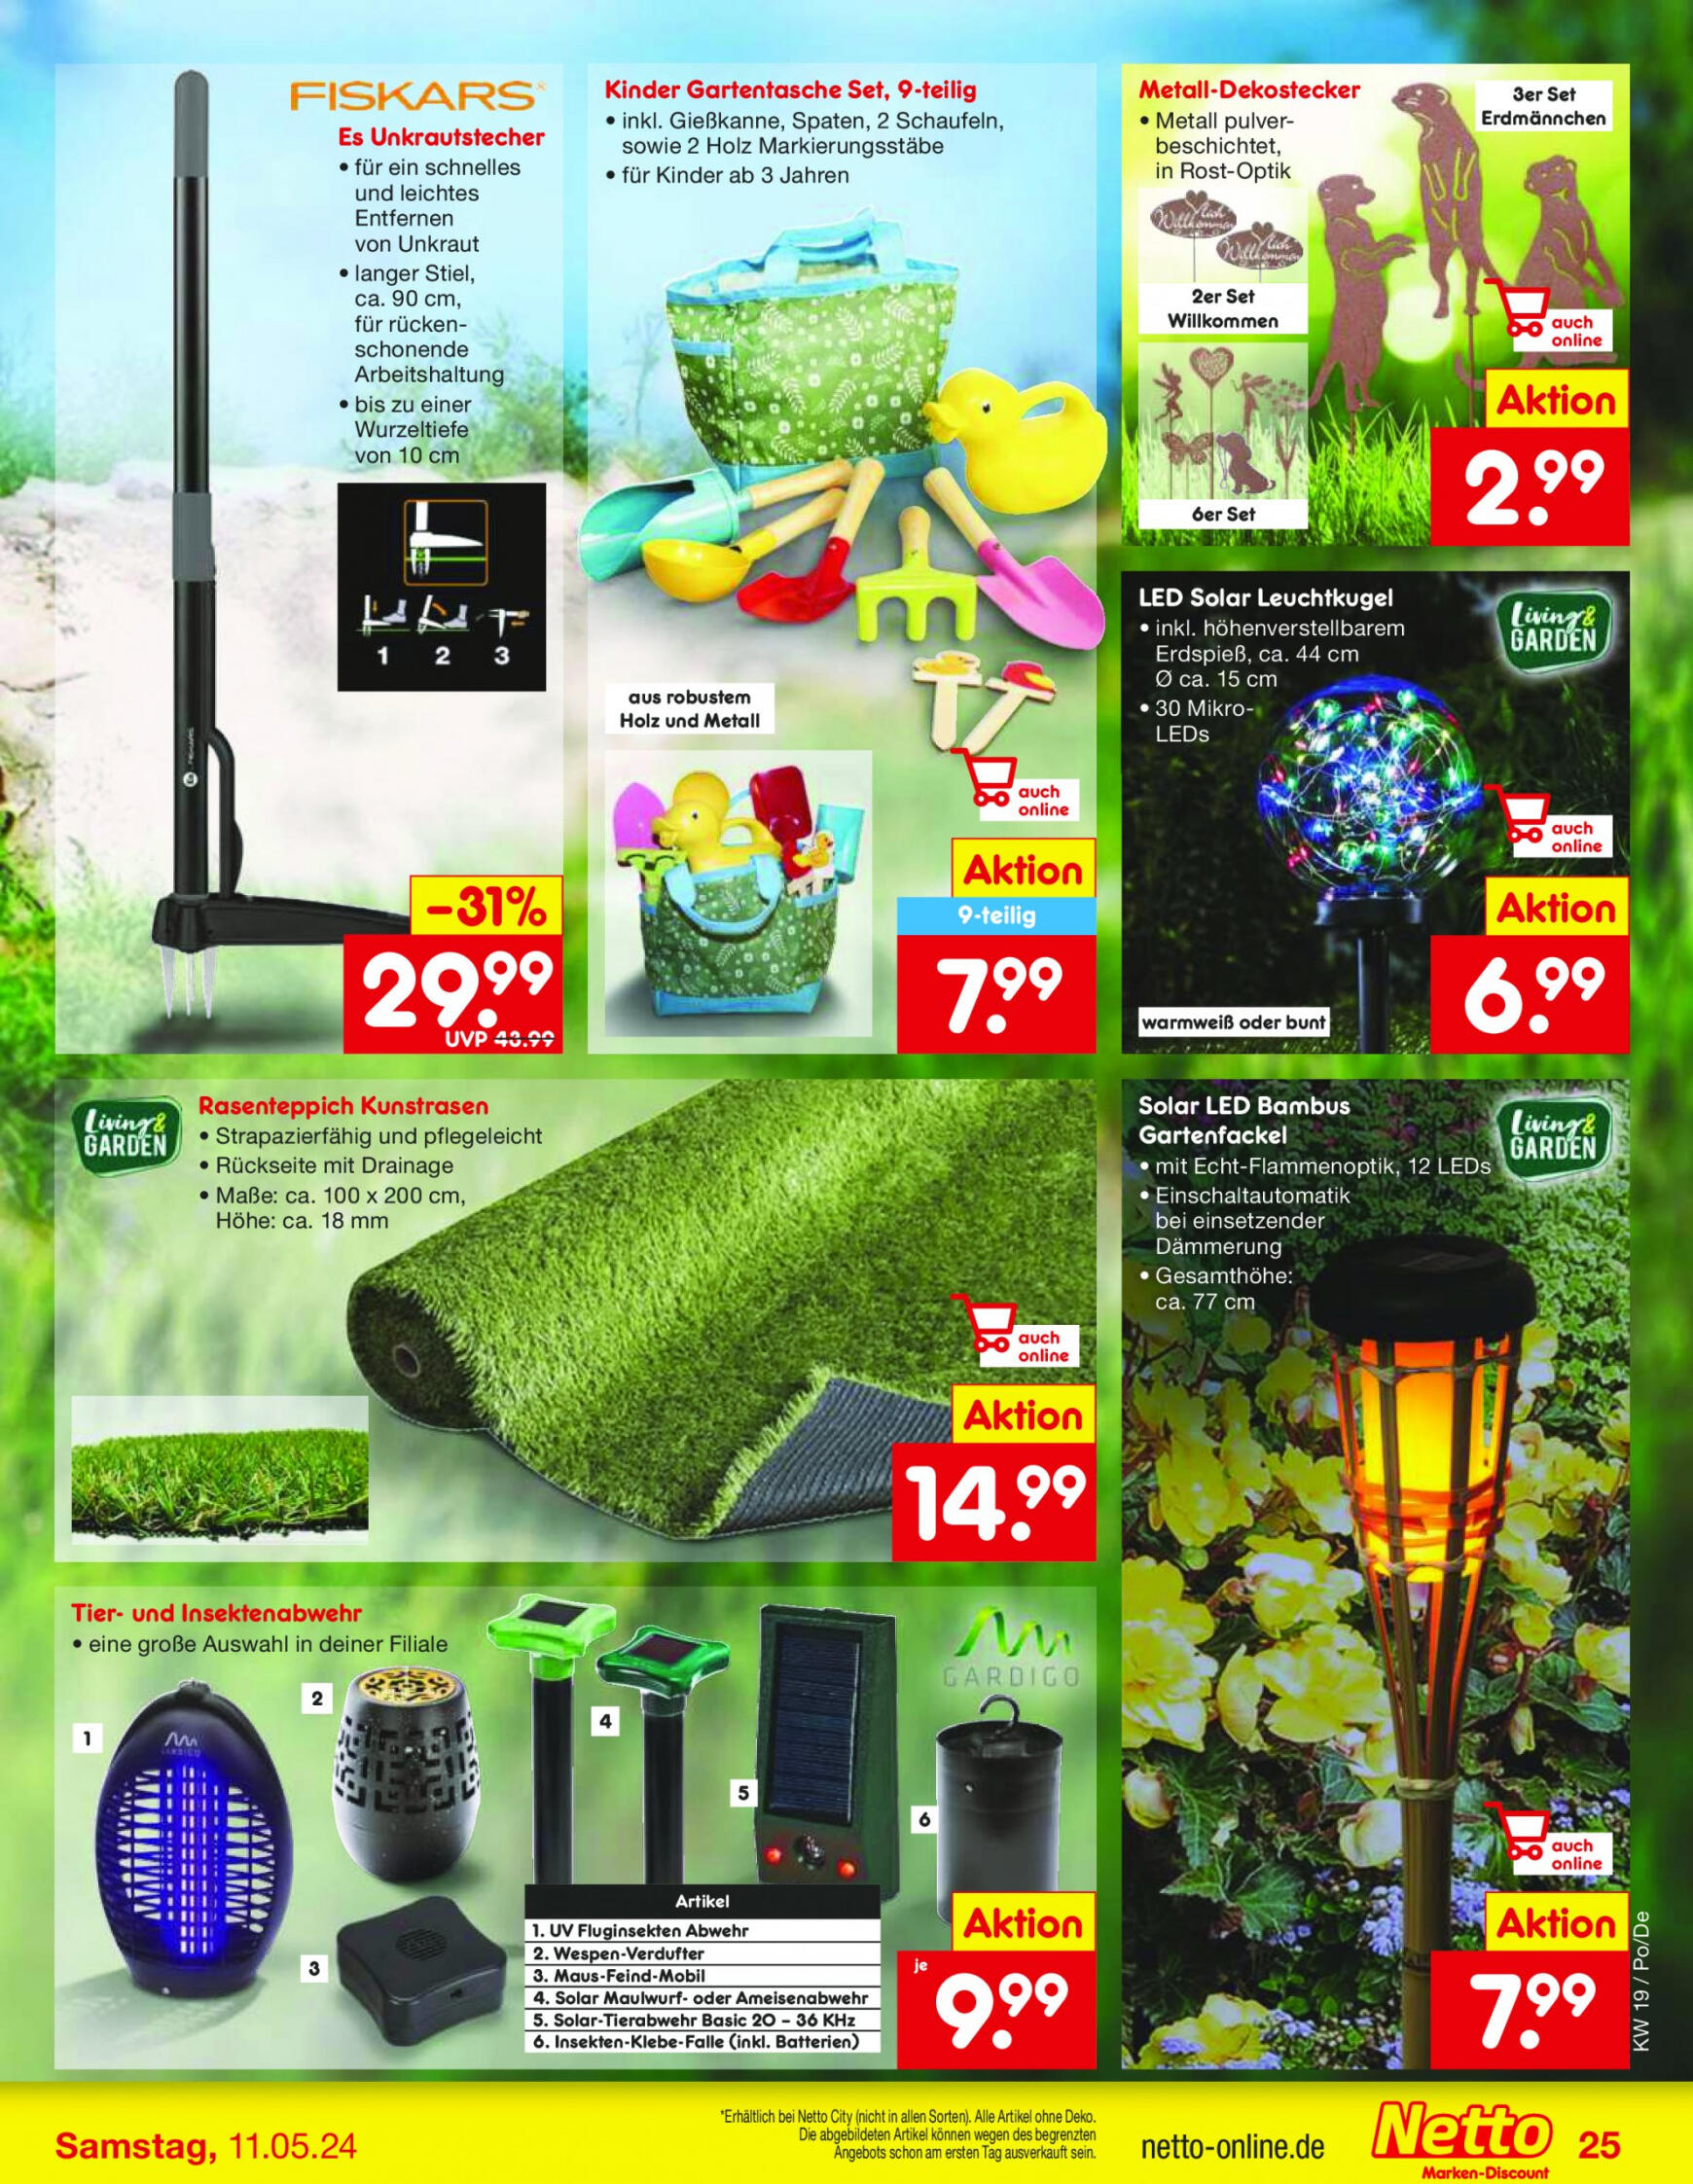 netto - Flyer Netto aktuell 06.05. - 11.05. - page: 33